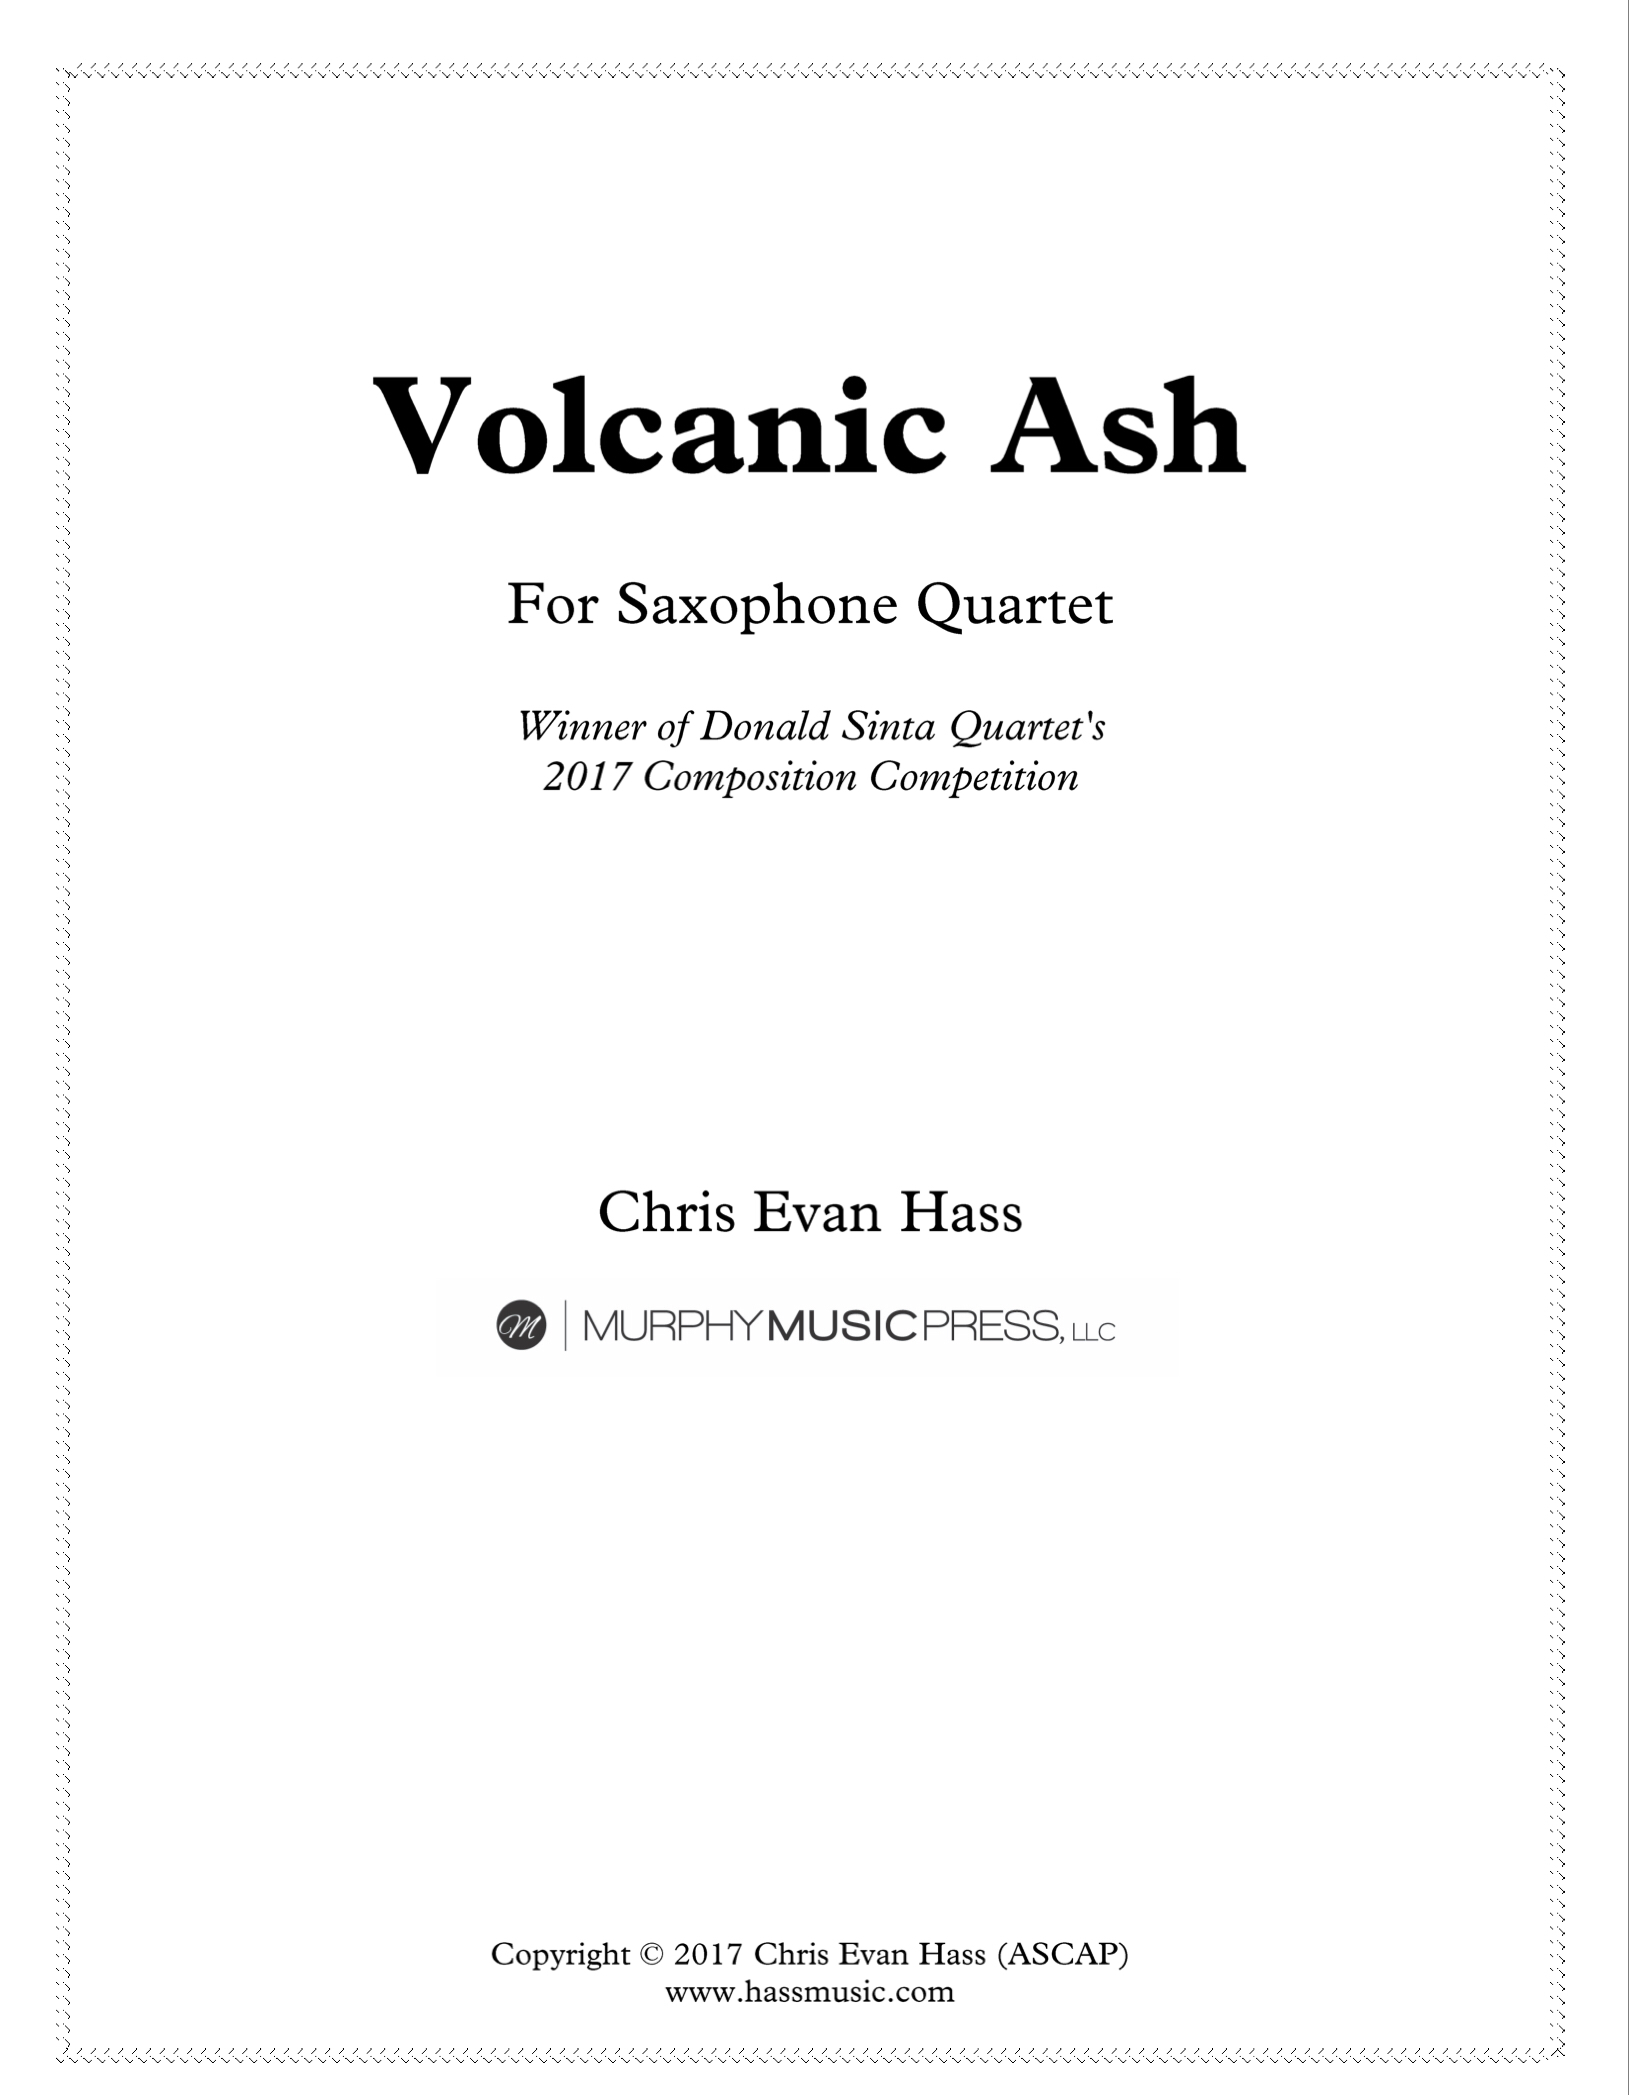 Volcanic Ash by Chris Hass